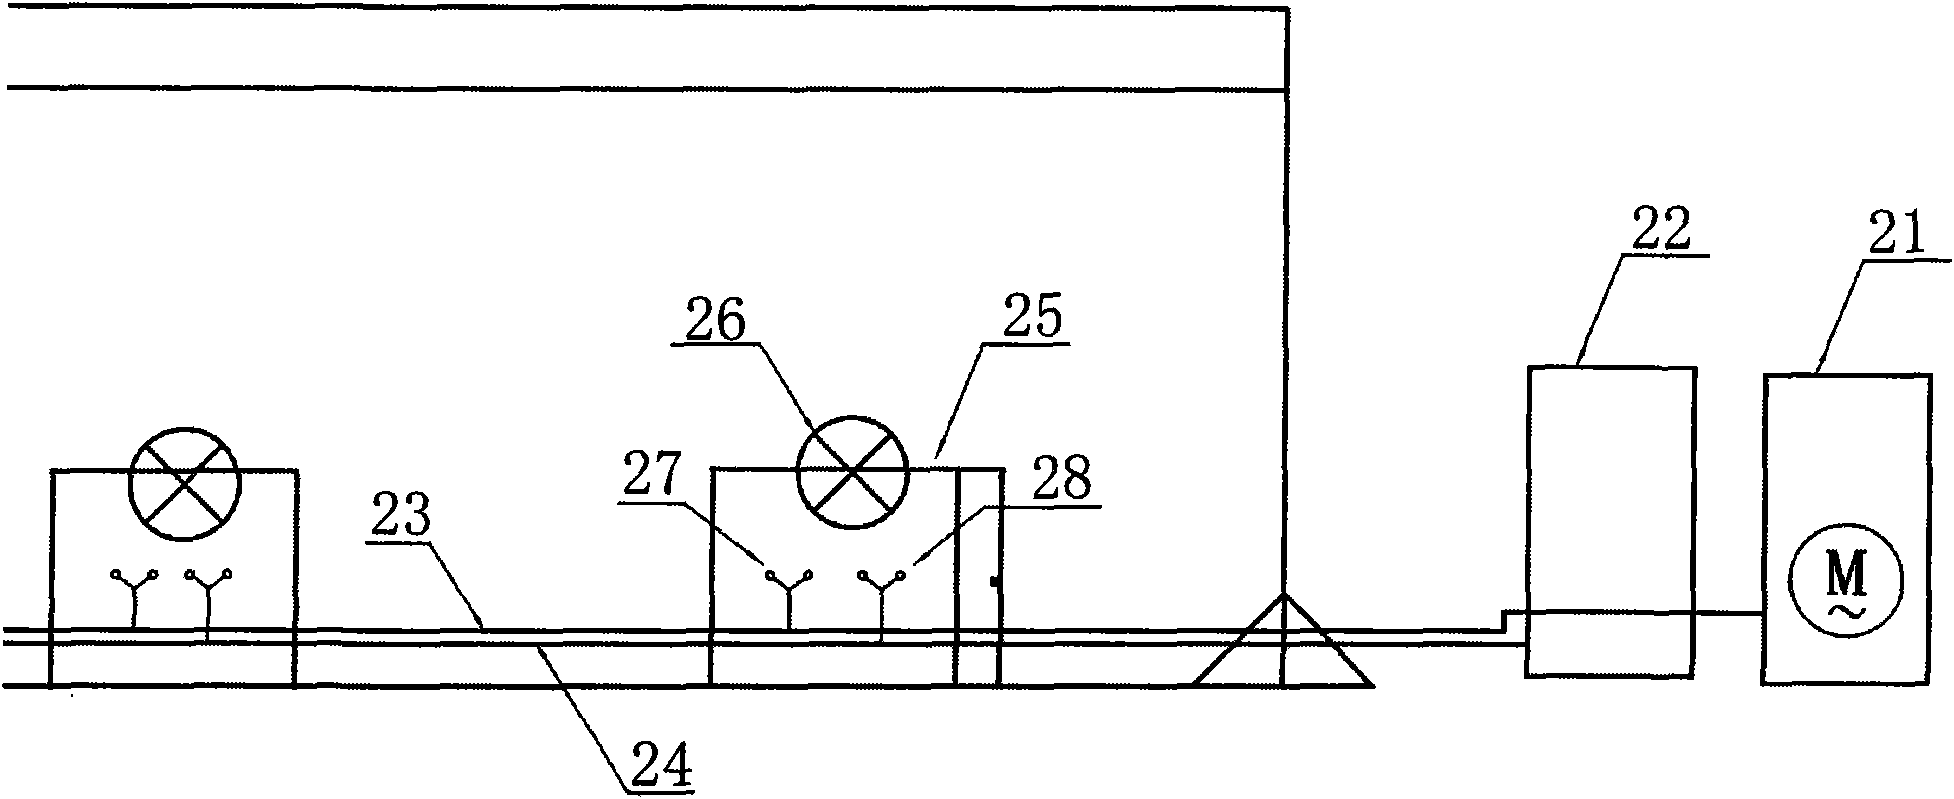 Method for eliminating volatile organic compounds such as formaldehyde and benzene in furniture